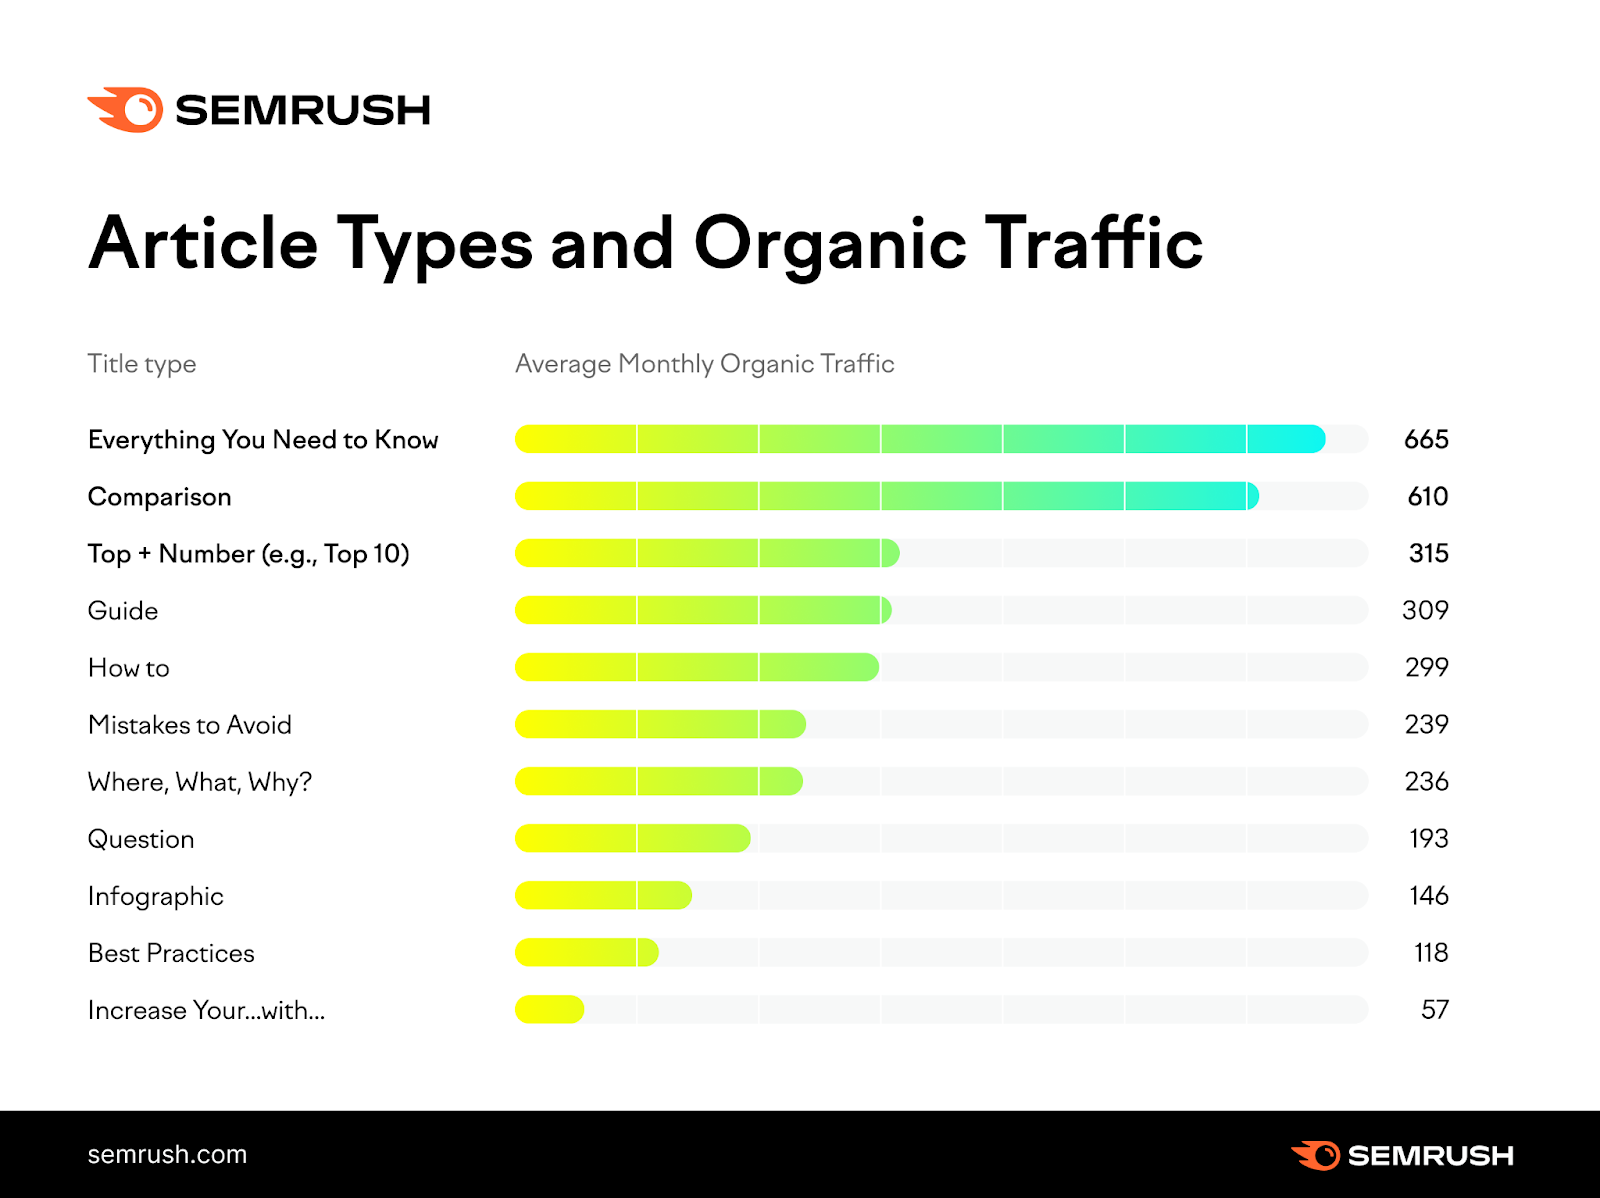 Article types and organic traffic